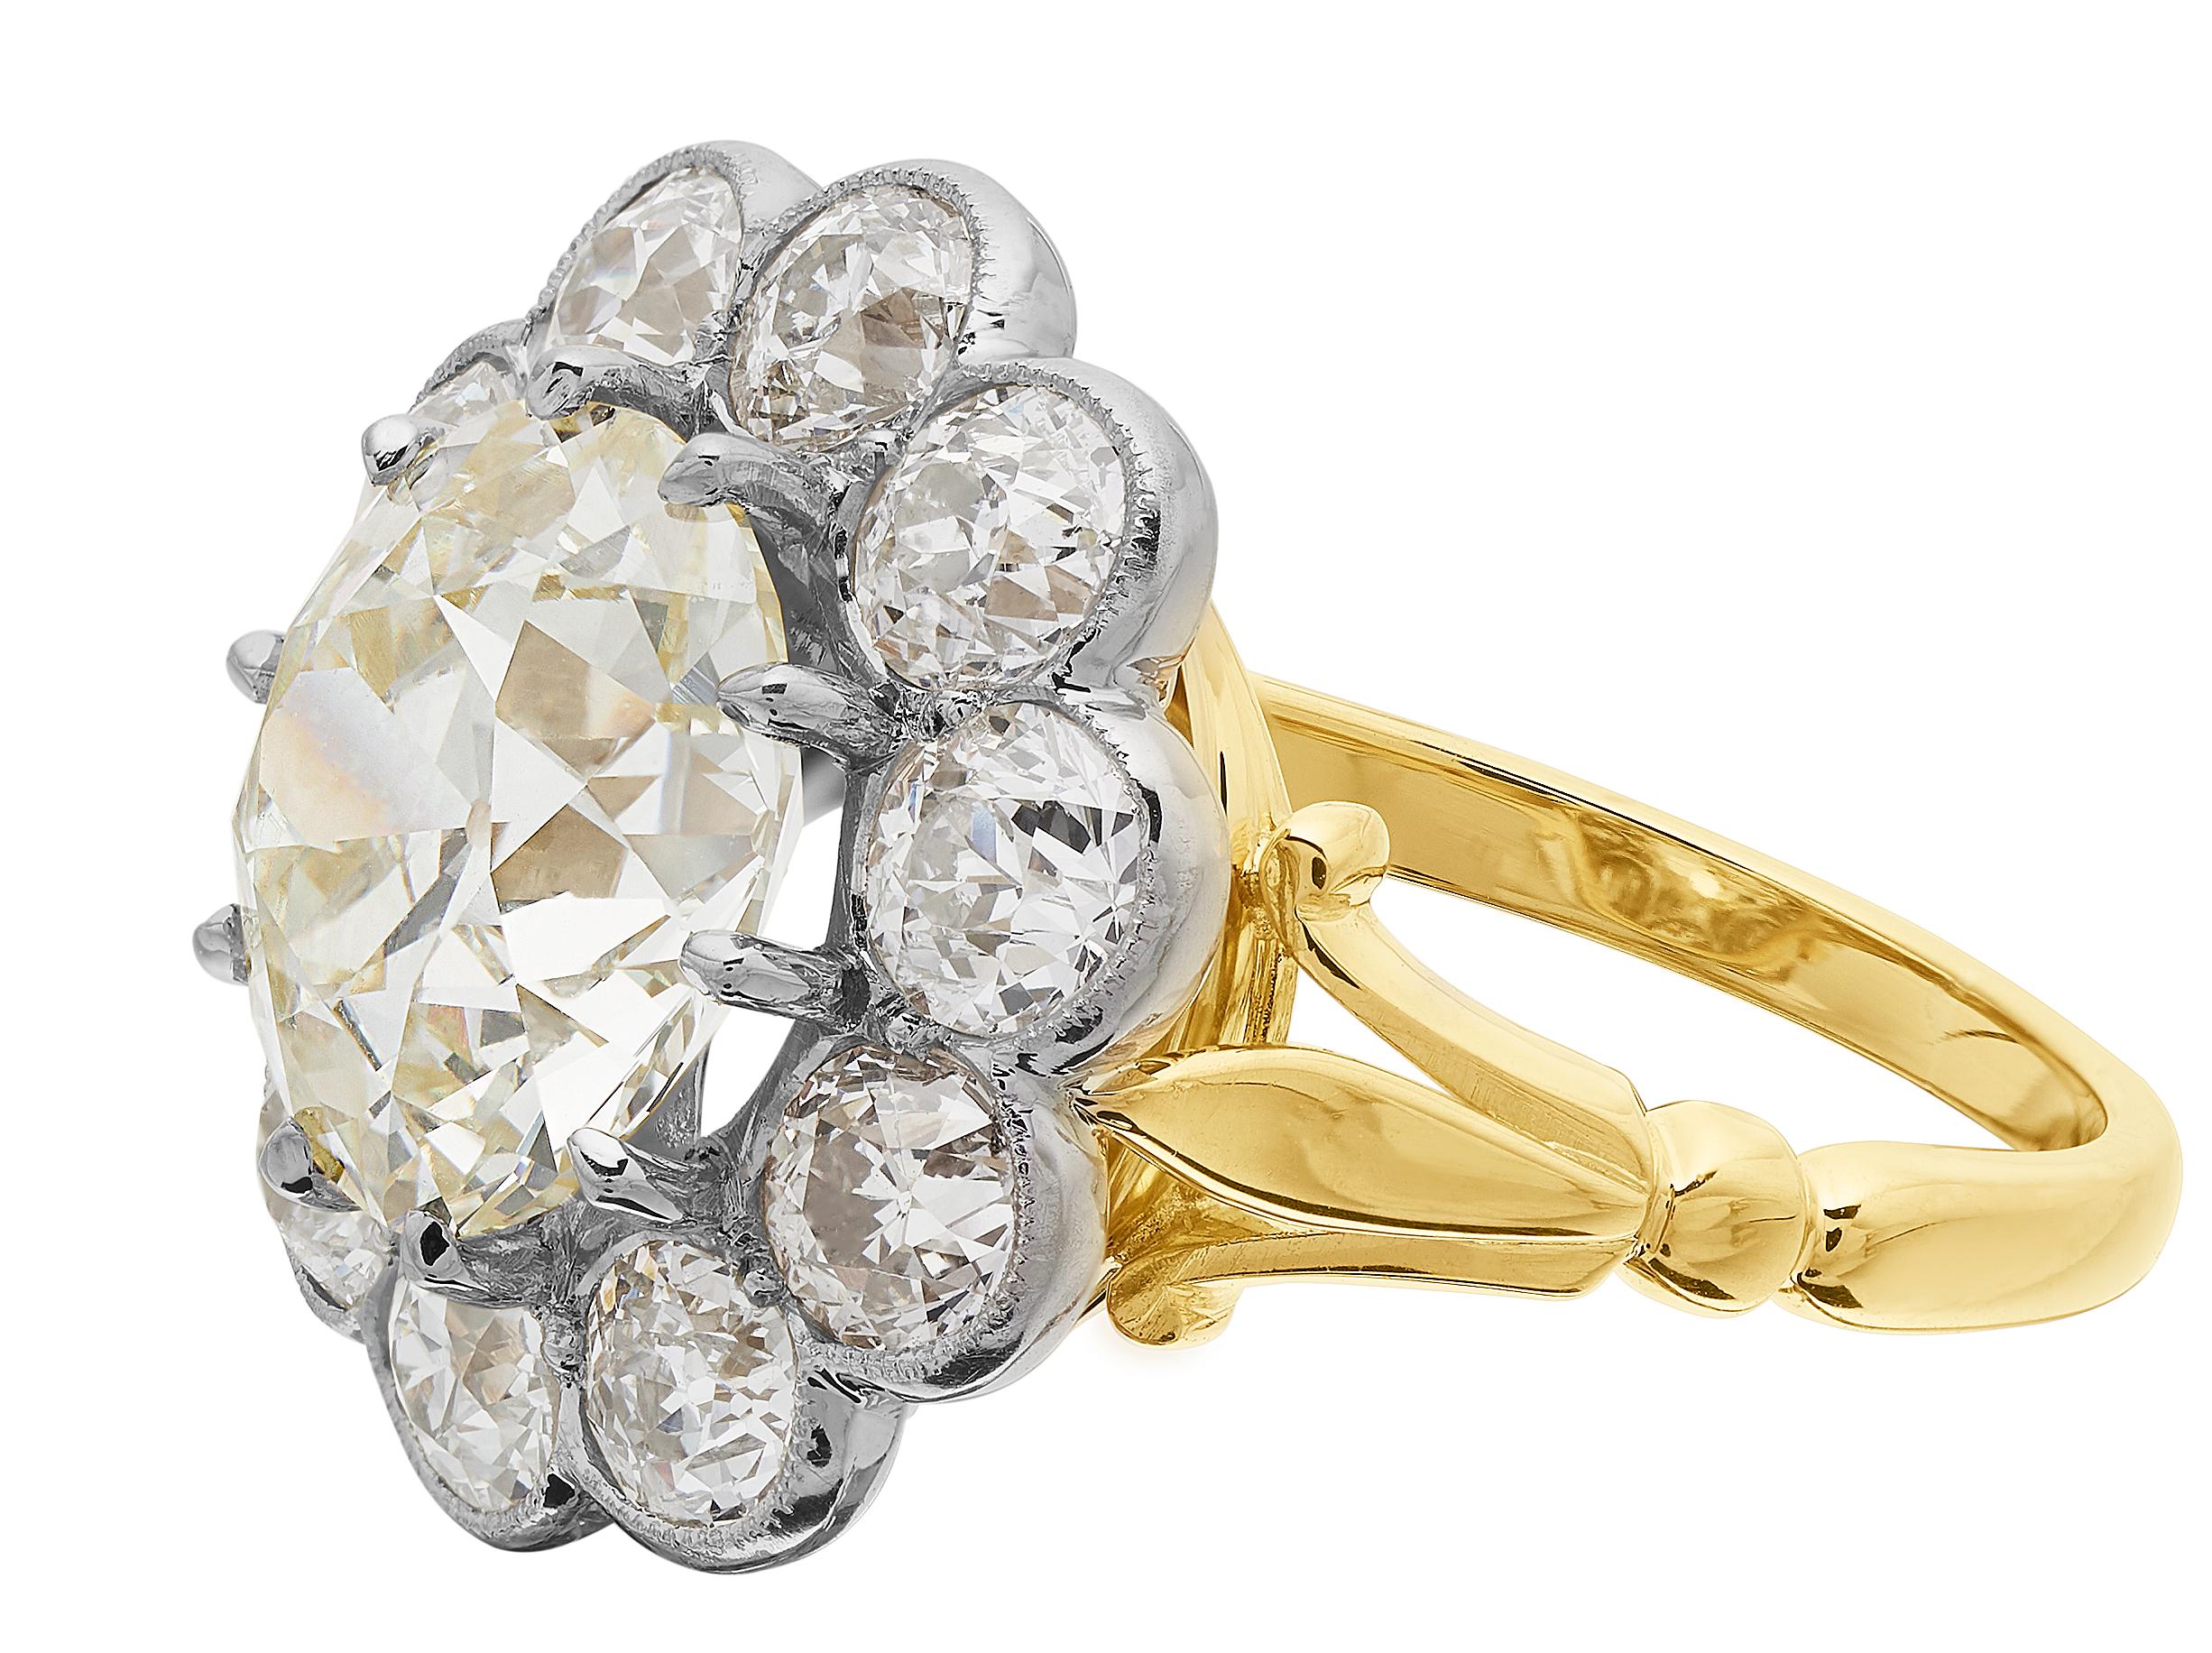 Victorian Certified Fancy Light Yellow Diamond 4.6 Carat Antique Old Cut Cluster Ring